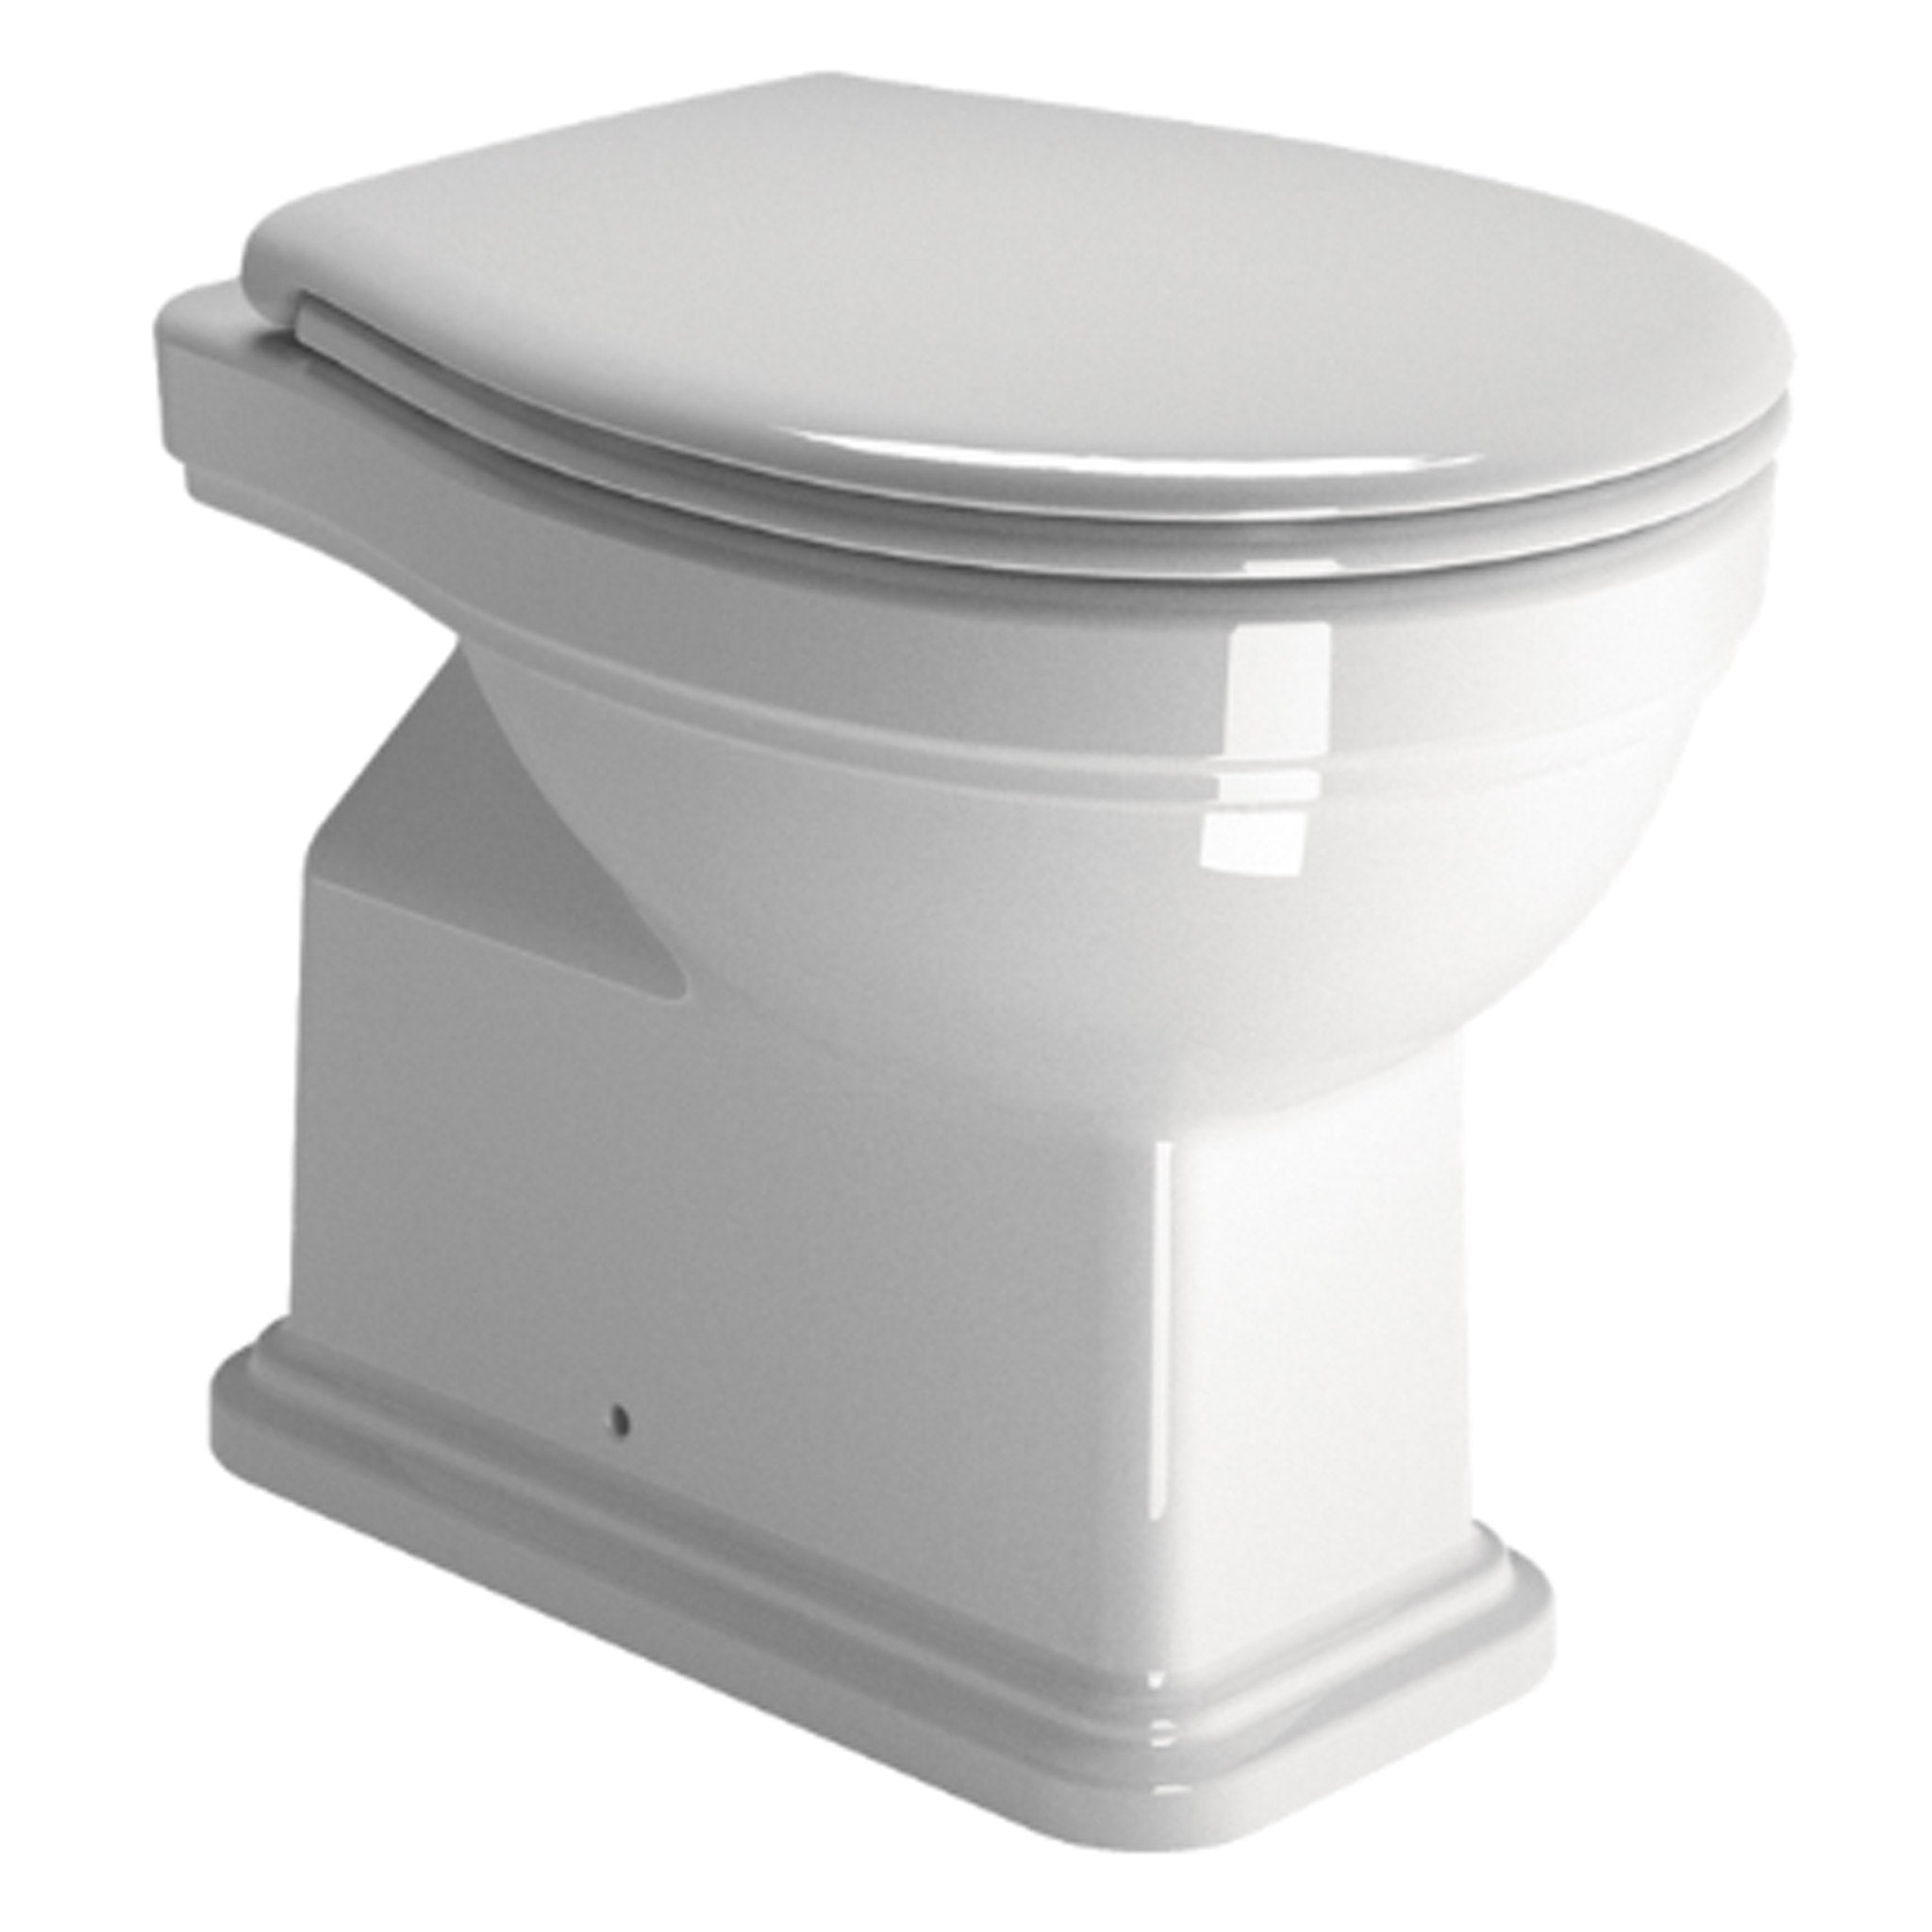 GSI Classic 54 Back To Wall WC Pan 540 x 370mm (Without Seat)